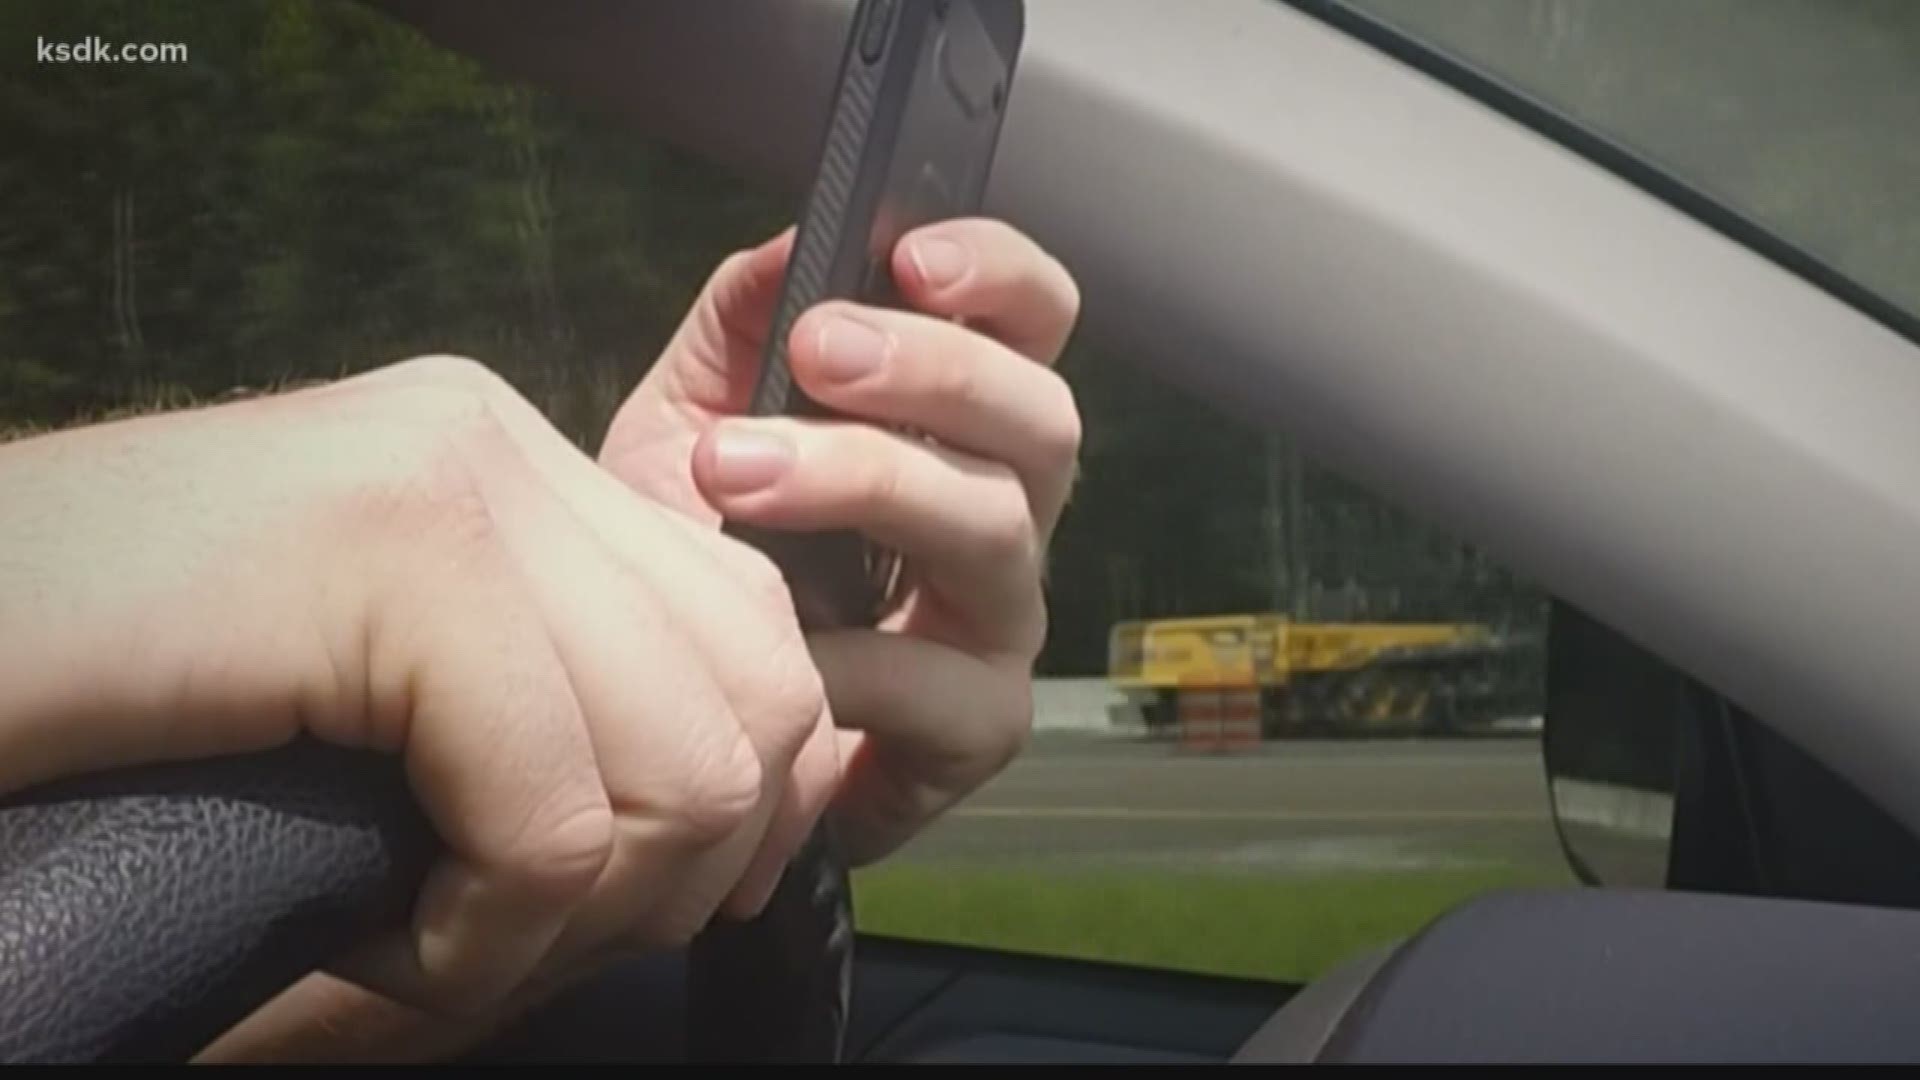 Missouri is one of only three states in the country that doesn't have a texting ban for drivers.